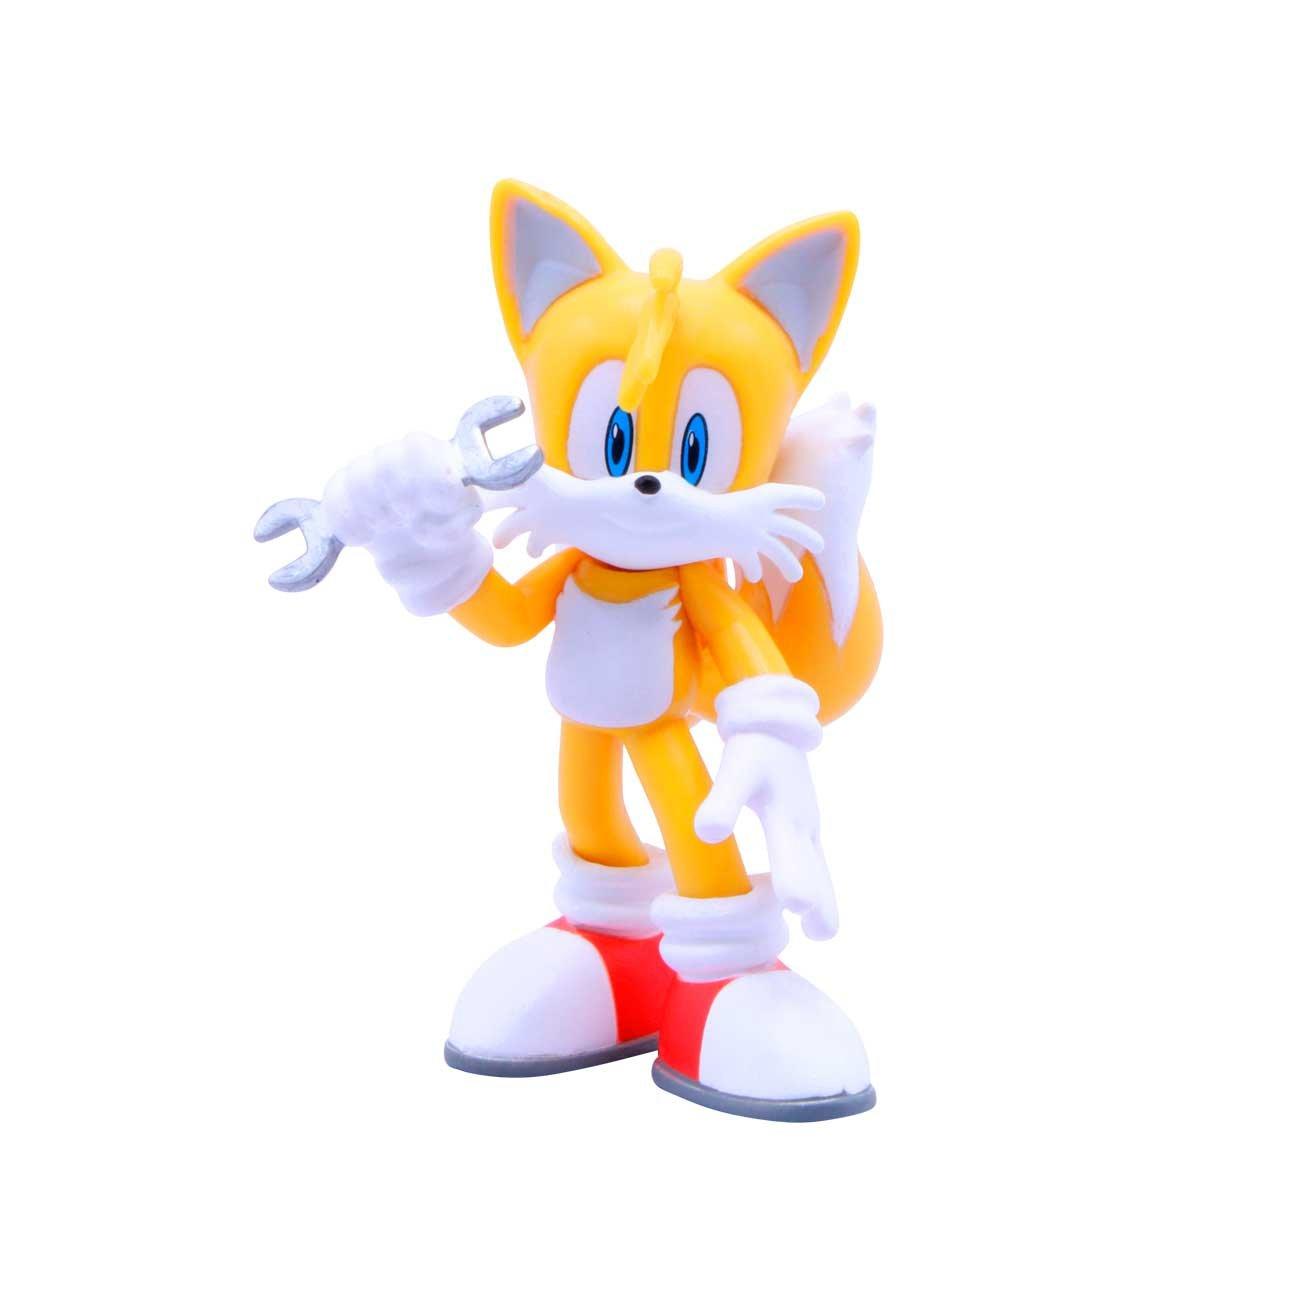 Sonic The Hedgehog Action Figure Toy – Sonic The Hedgehog Figure with  Tails, Knuckles, Amy Rose, and Shadow Figure. 4 inch Action Figures - Sonic  The